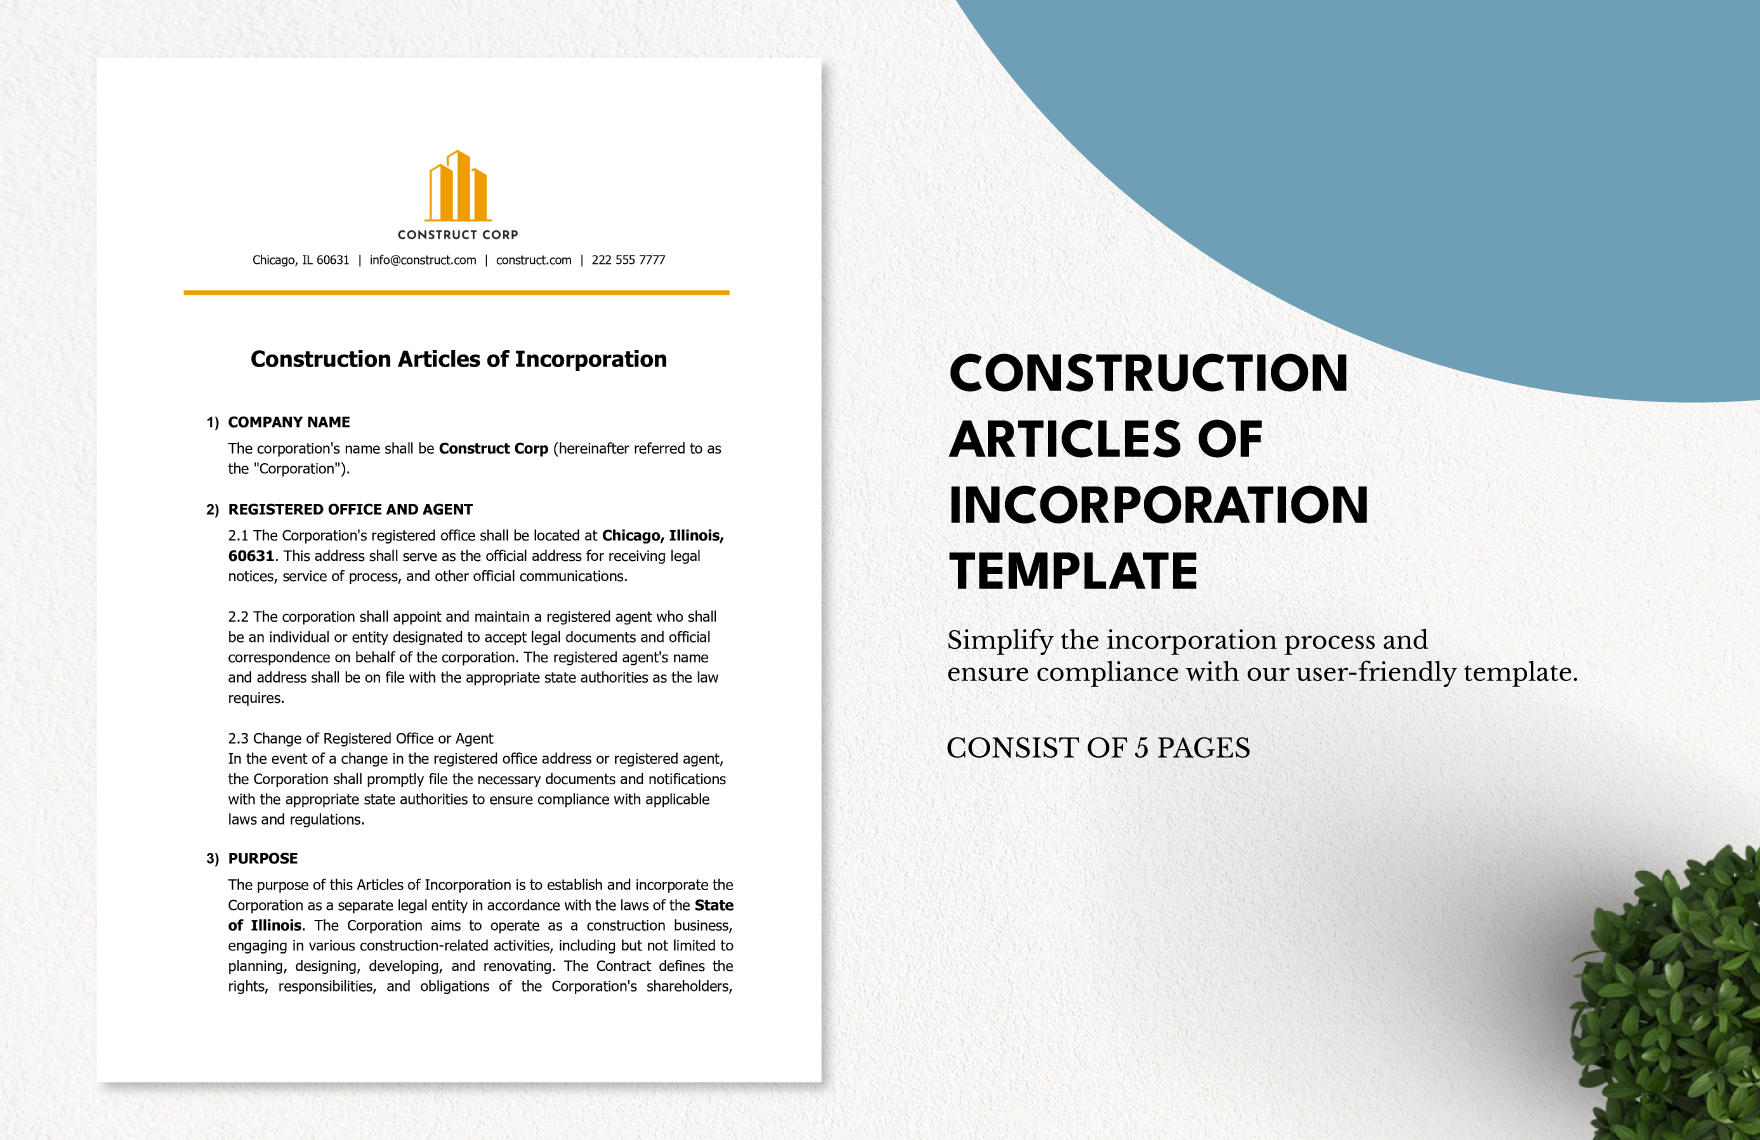 Construction Articles of Incorporation 